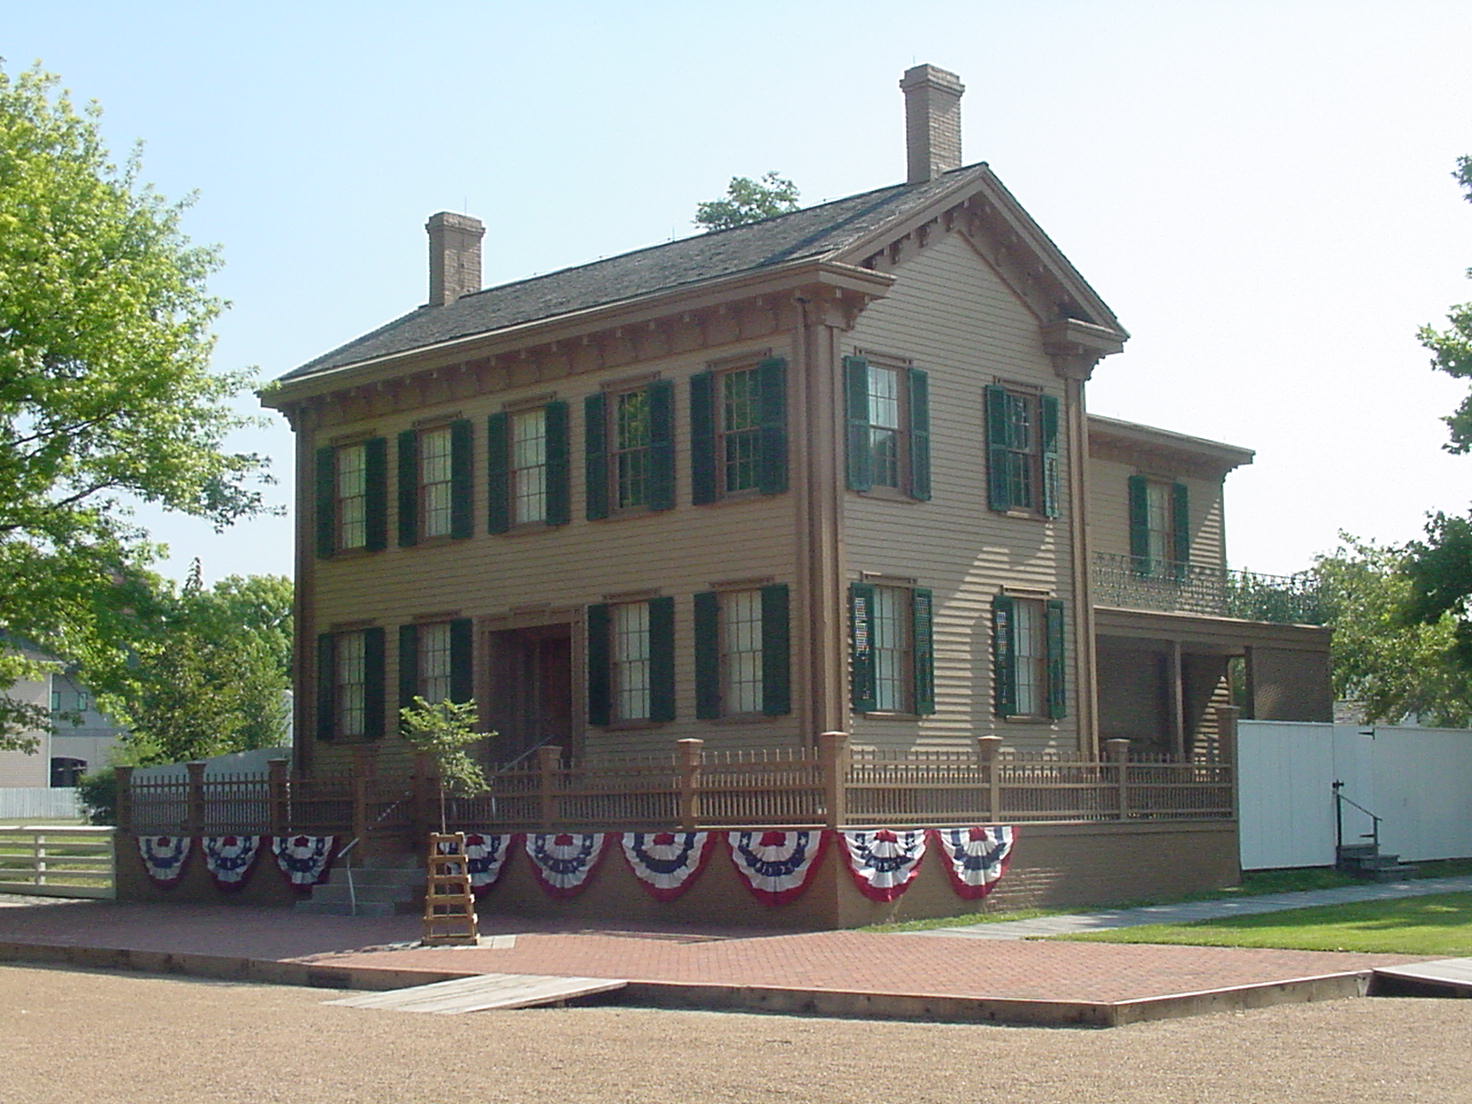 Yup, this is where the Lincoln Family lived...